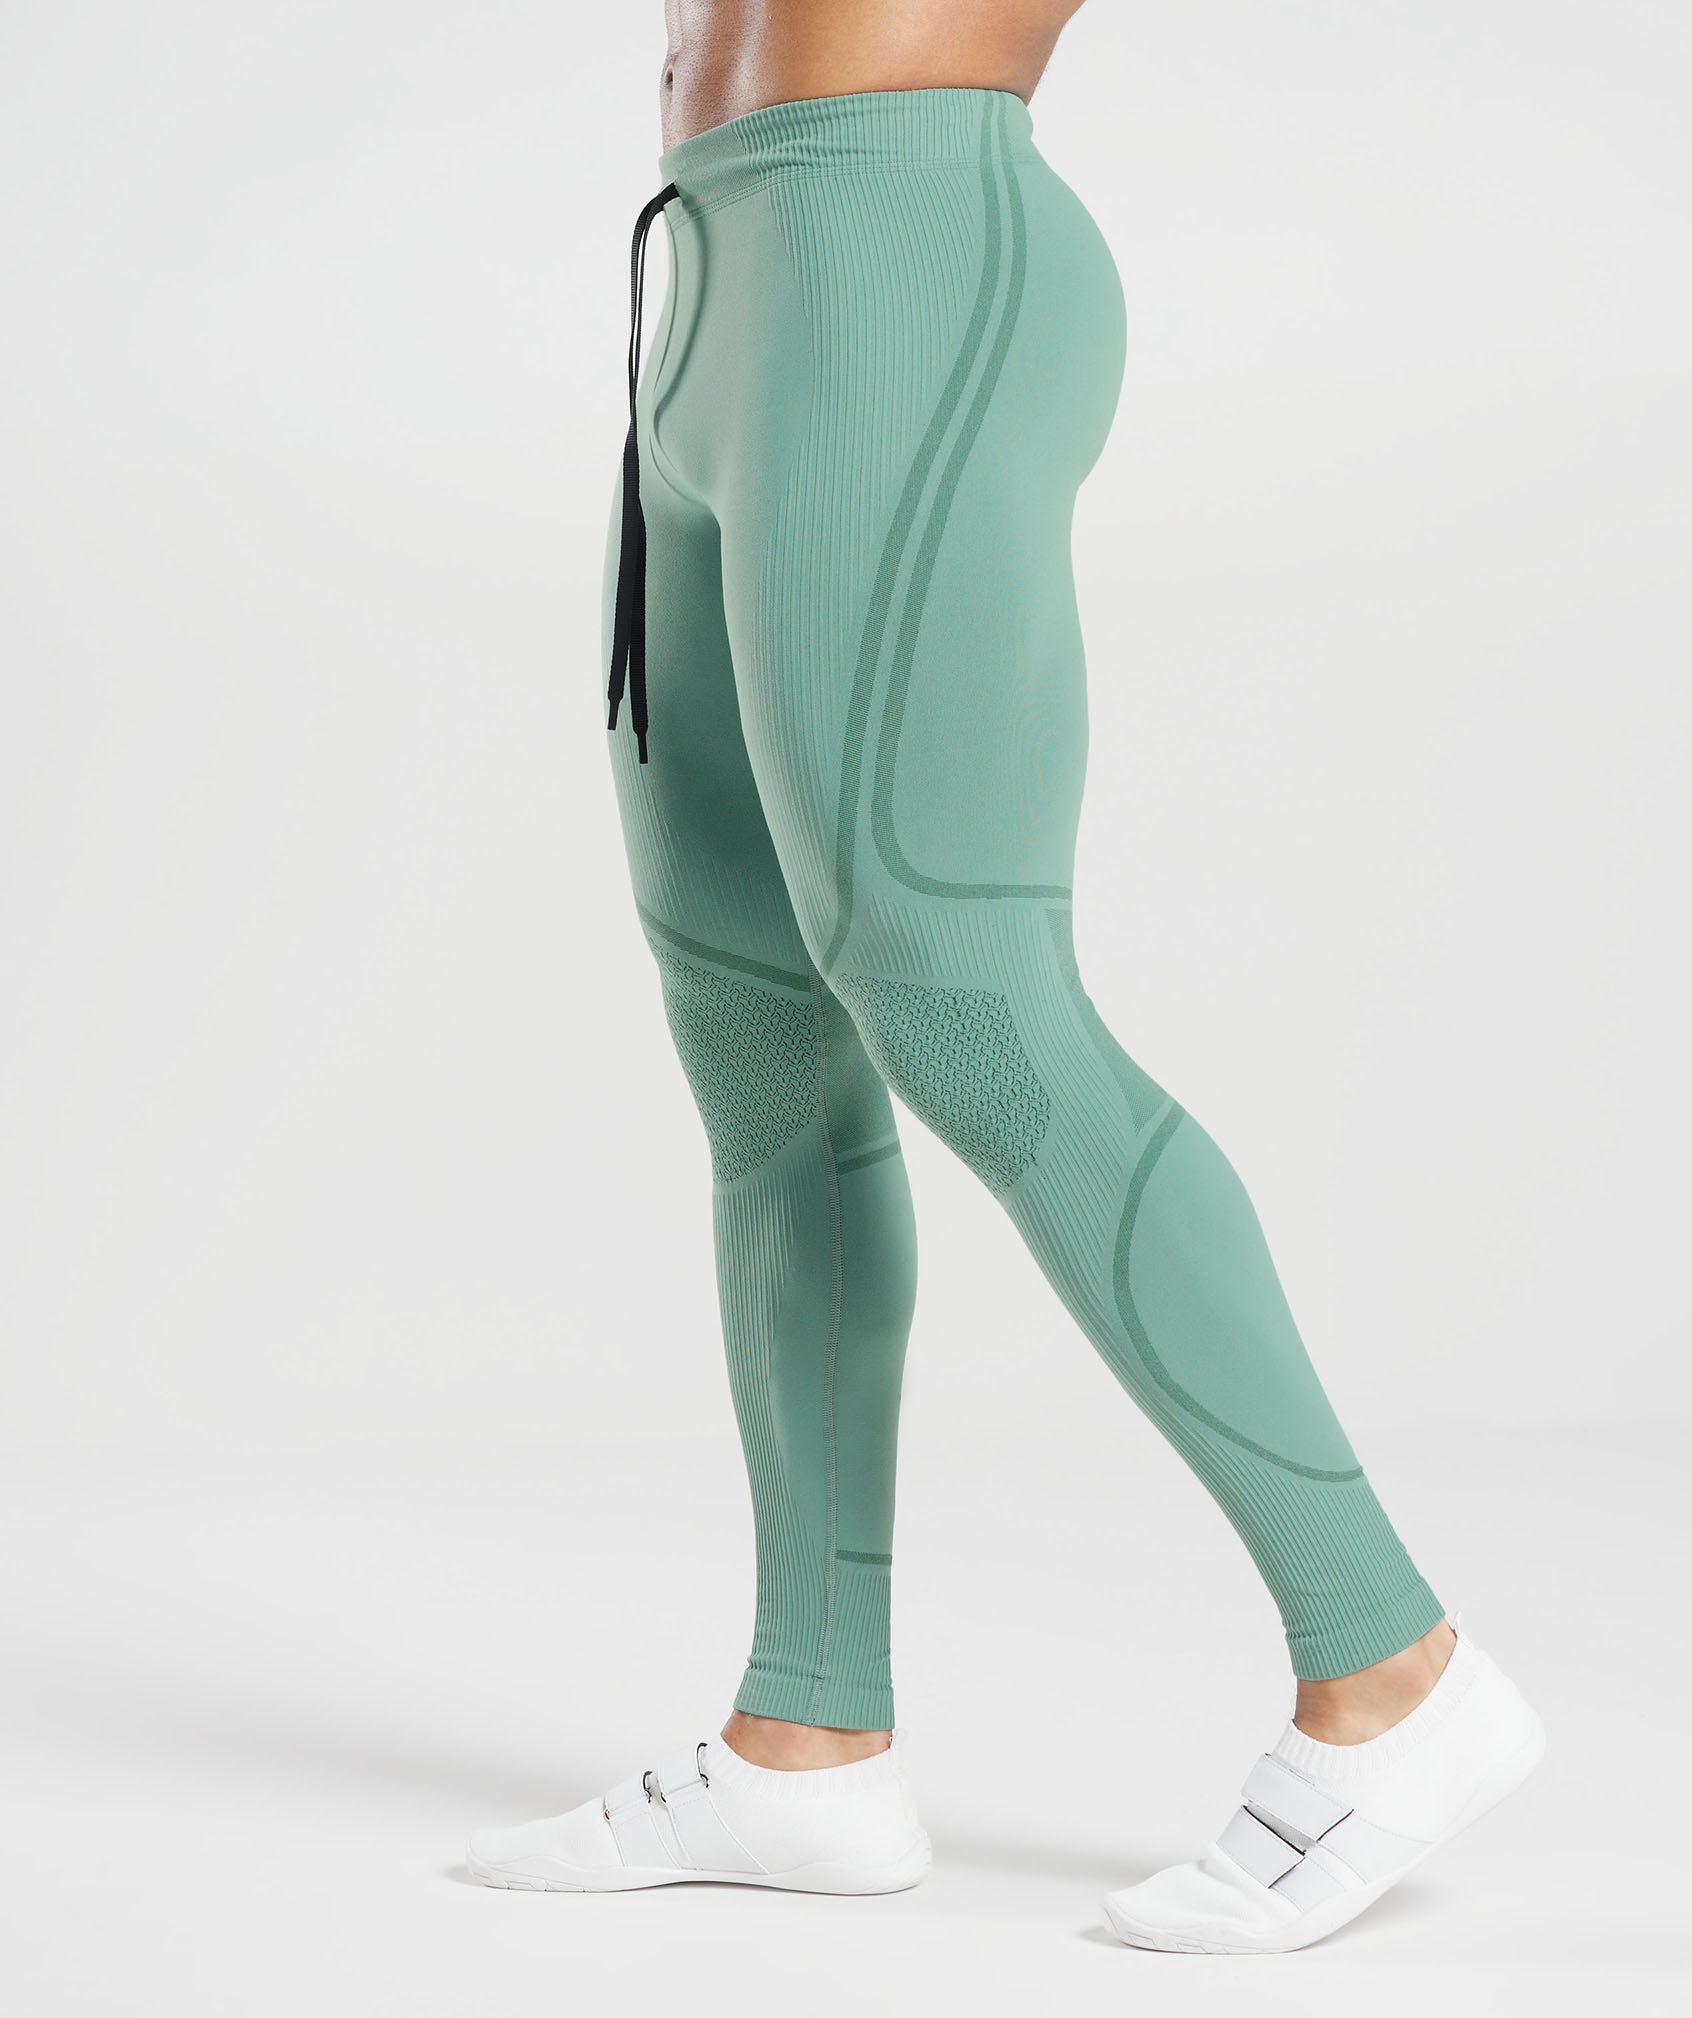 315 Seamless Tights in Ink Teal/Jewel Green - view 3